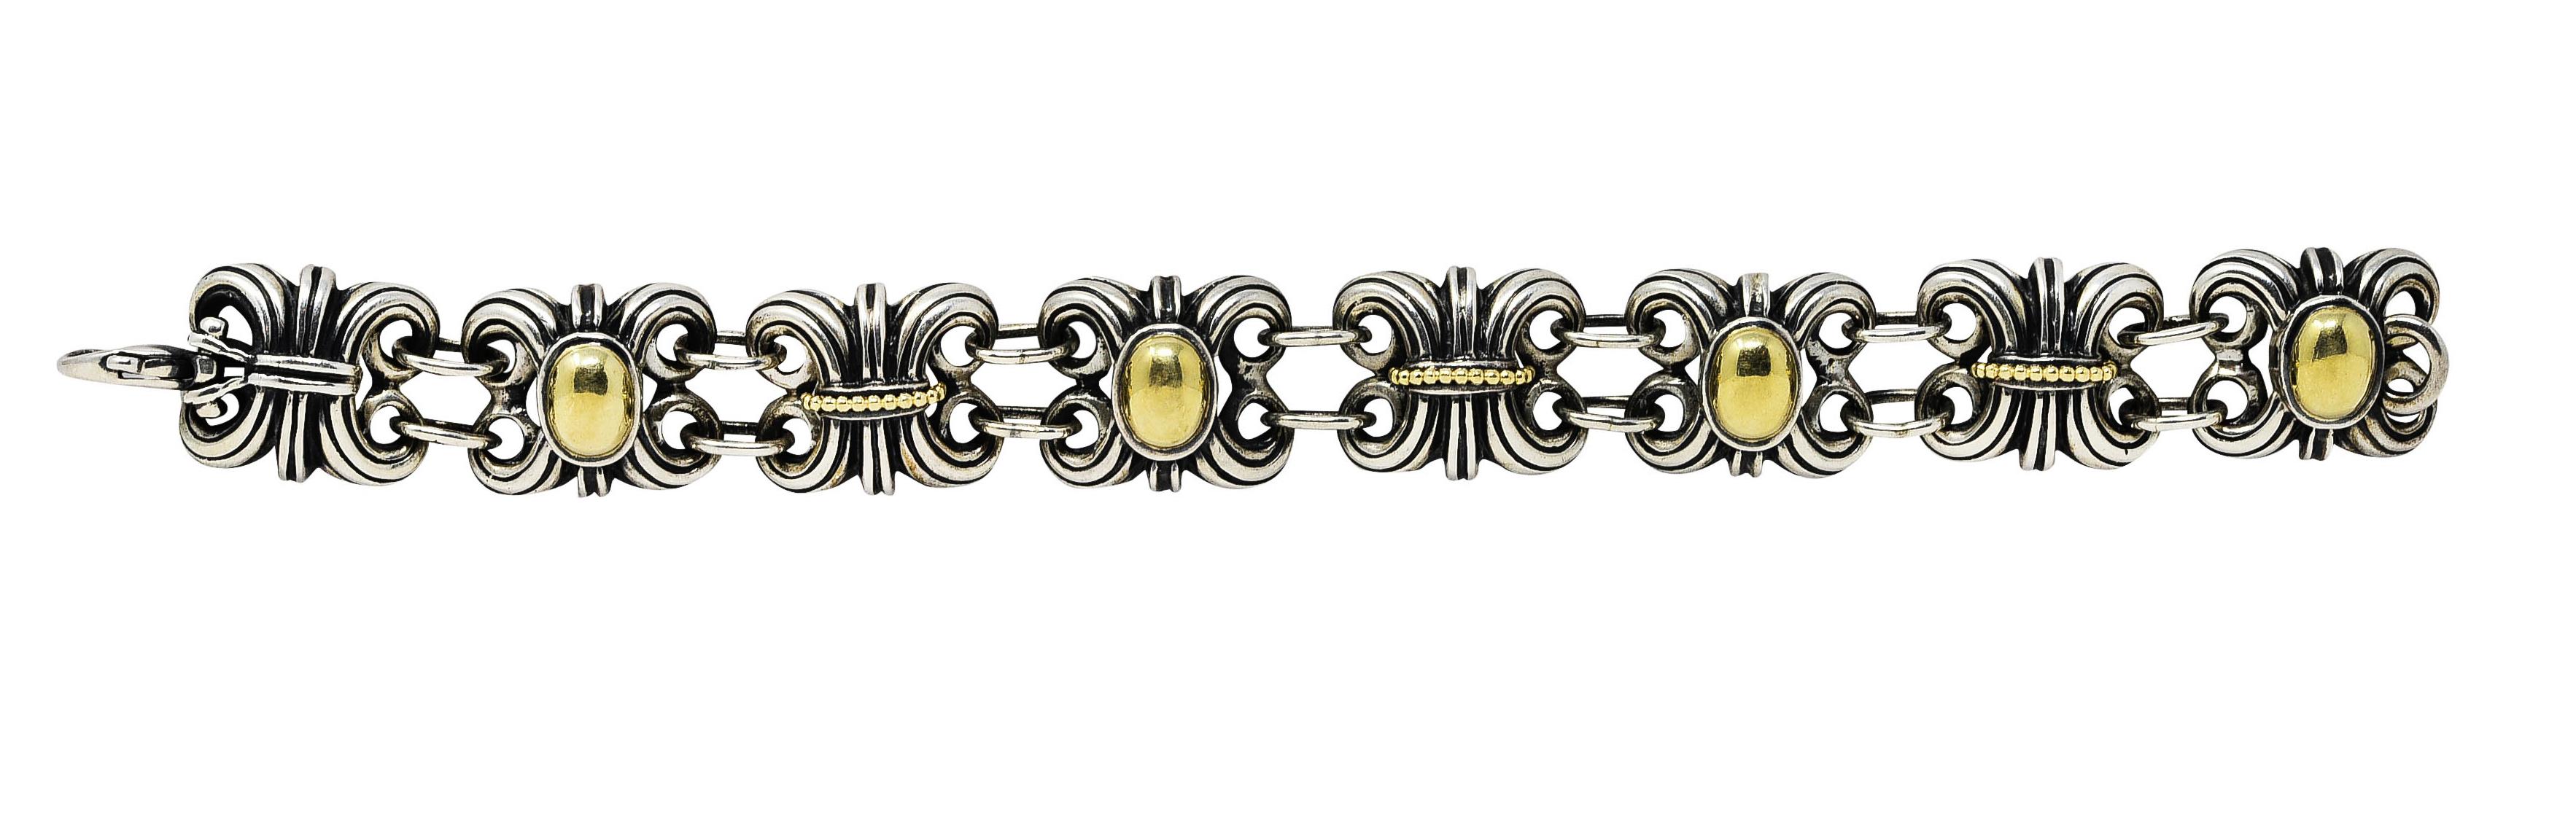 Link bracelet is comprised of scrolling fluted forms

Featuring an oval polished gold face or a row of gold beading

Alternating with sets of jump ring spacer links

Completed by a lobster clasp

Stamped 750 and 925 for 18 karat gold and sterling